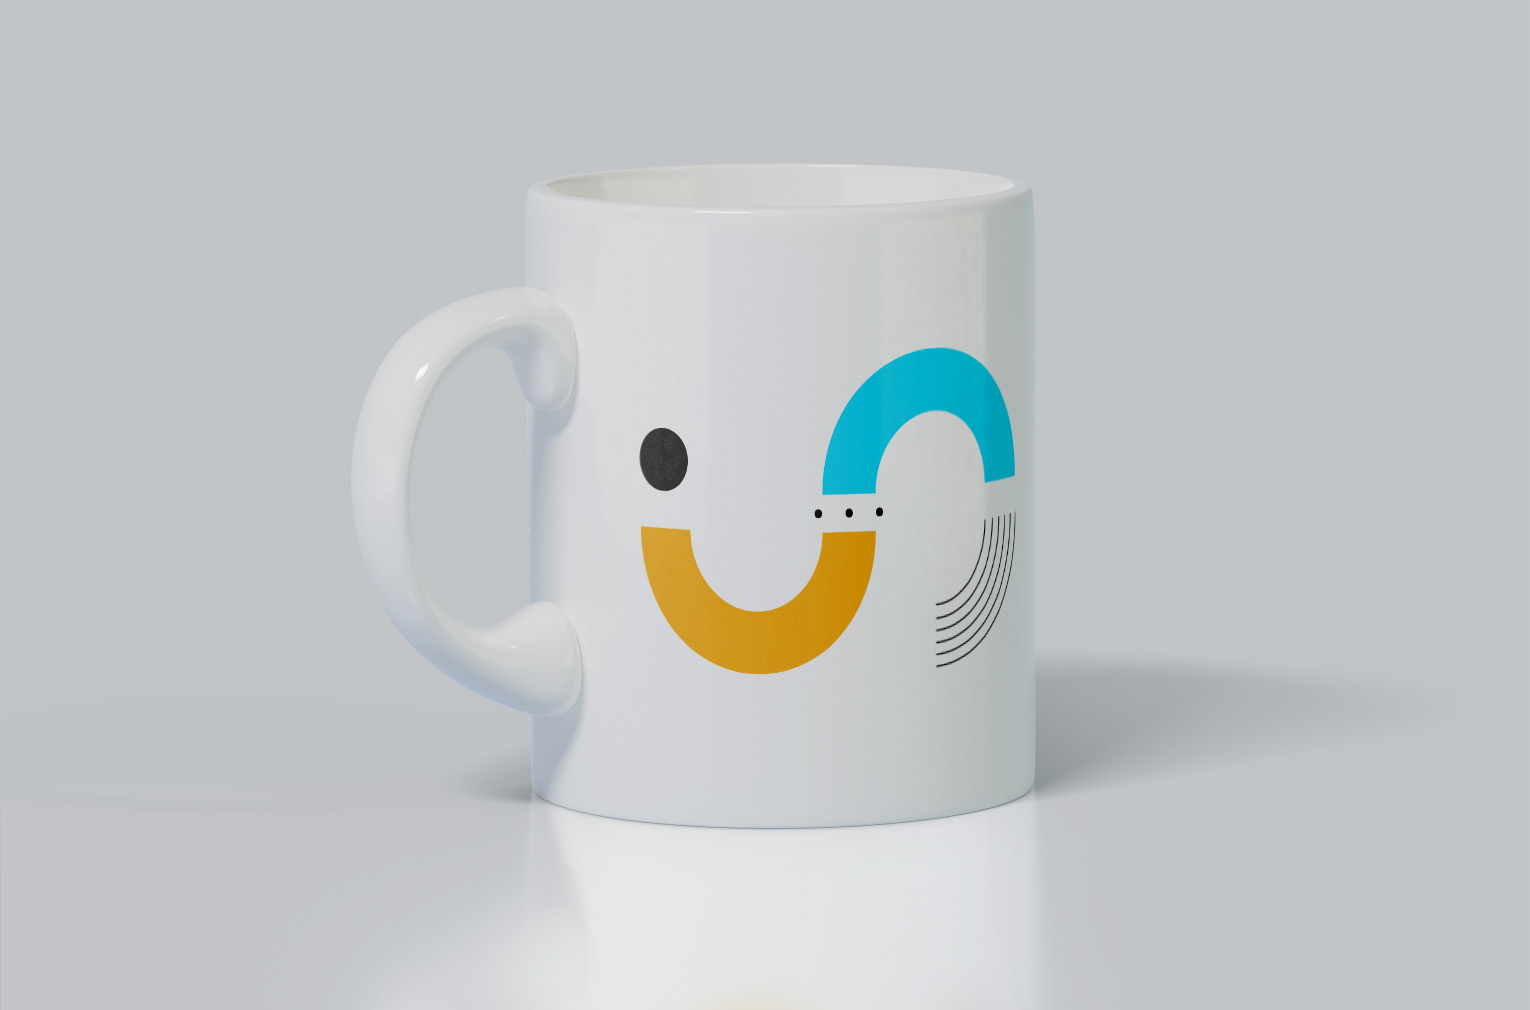 Custom mugs and merchandise products